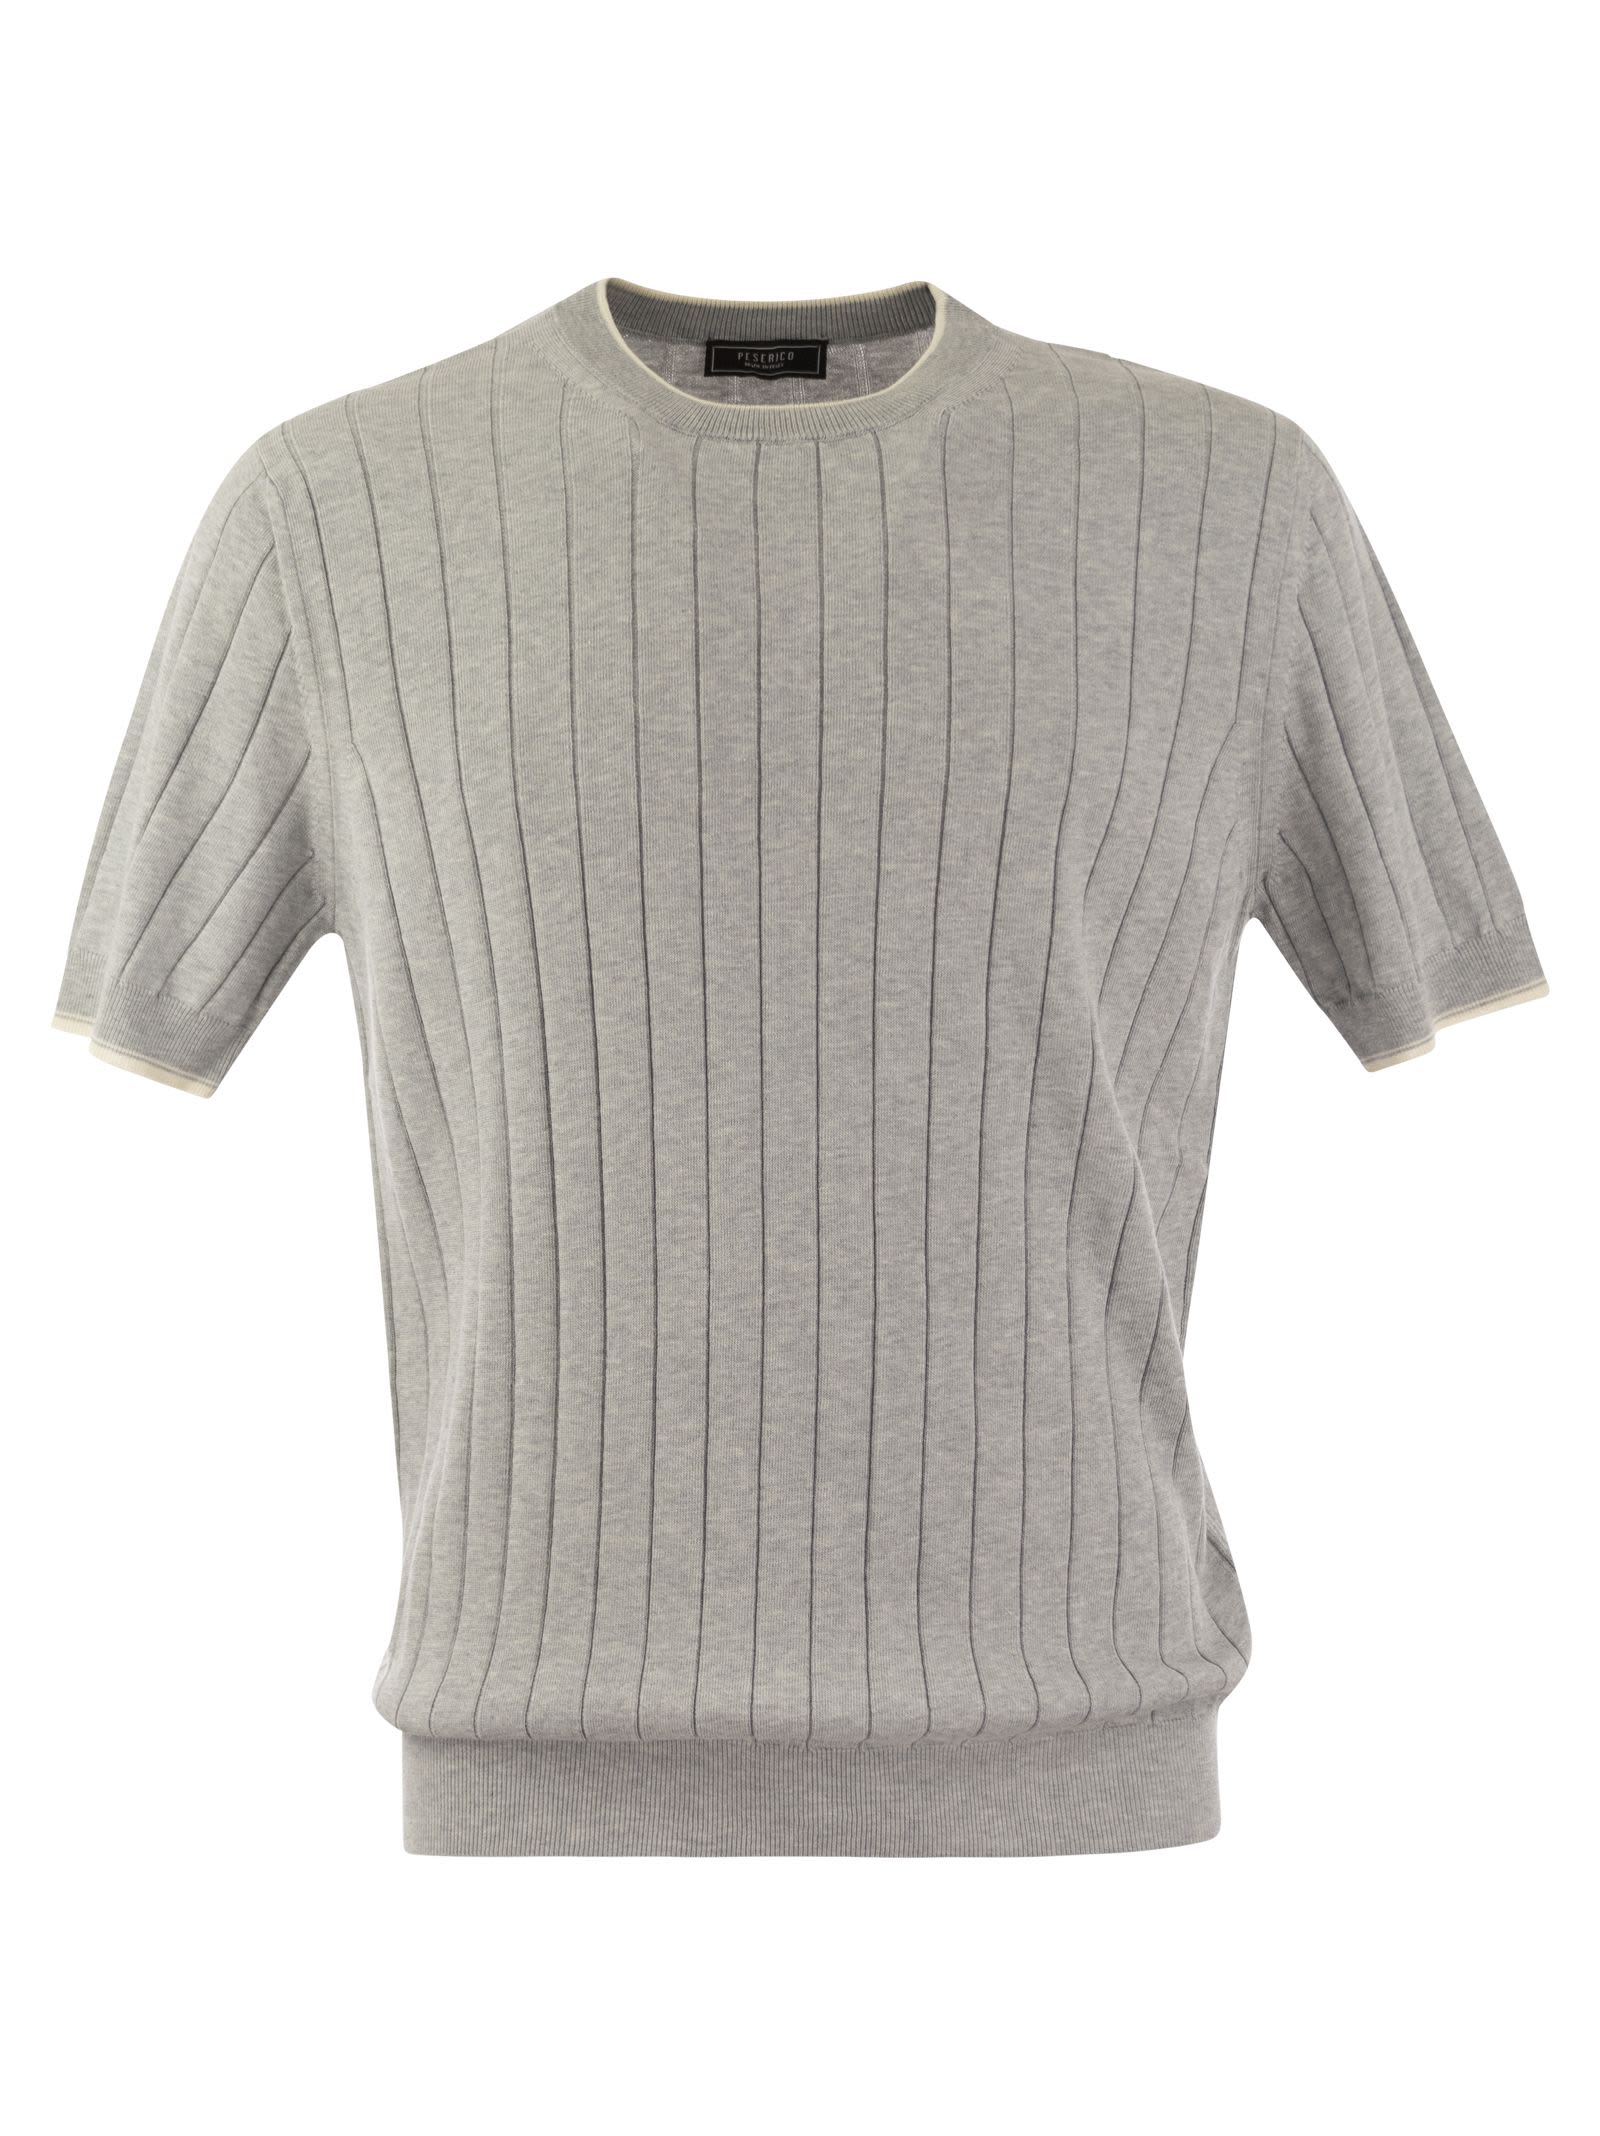 T-shirt In Pure Cotton Crépe Yarn